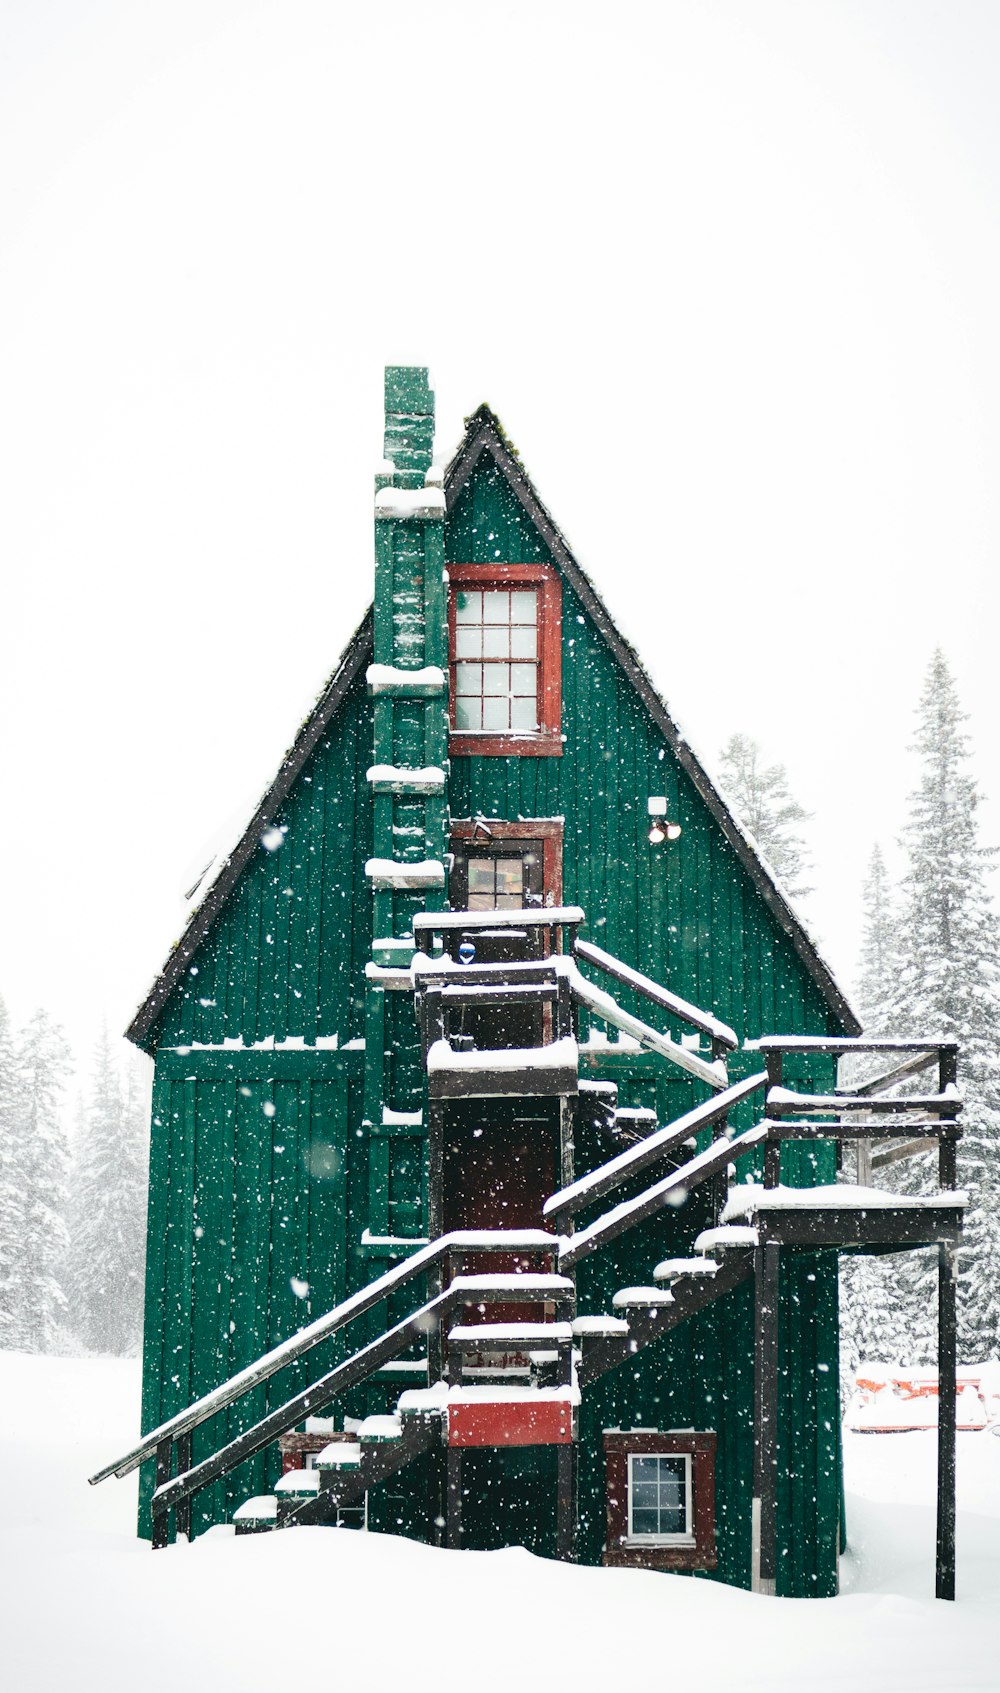 time-lapse photography of snow falling over green wooden house